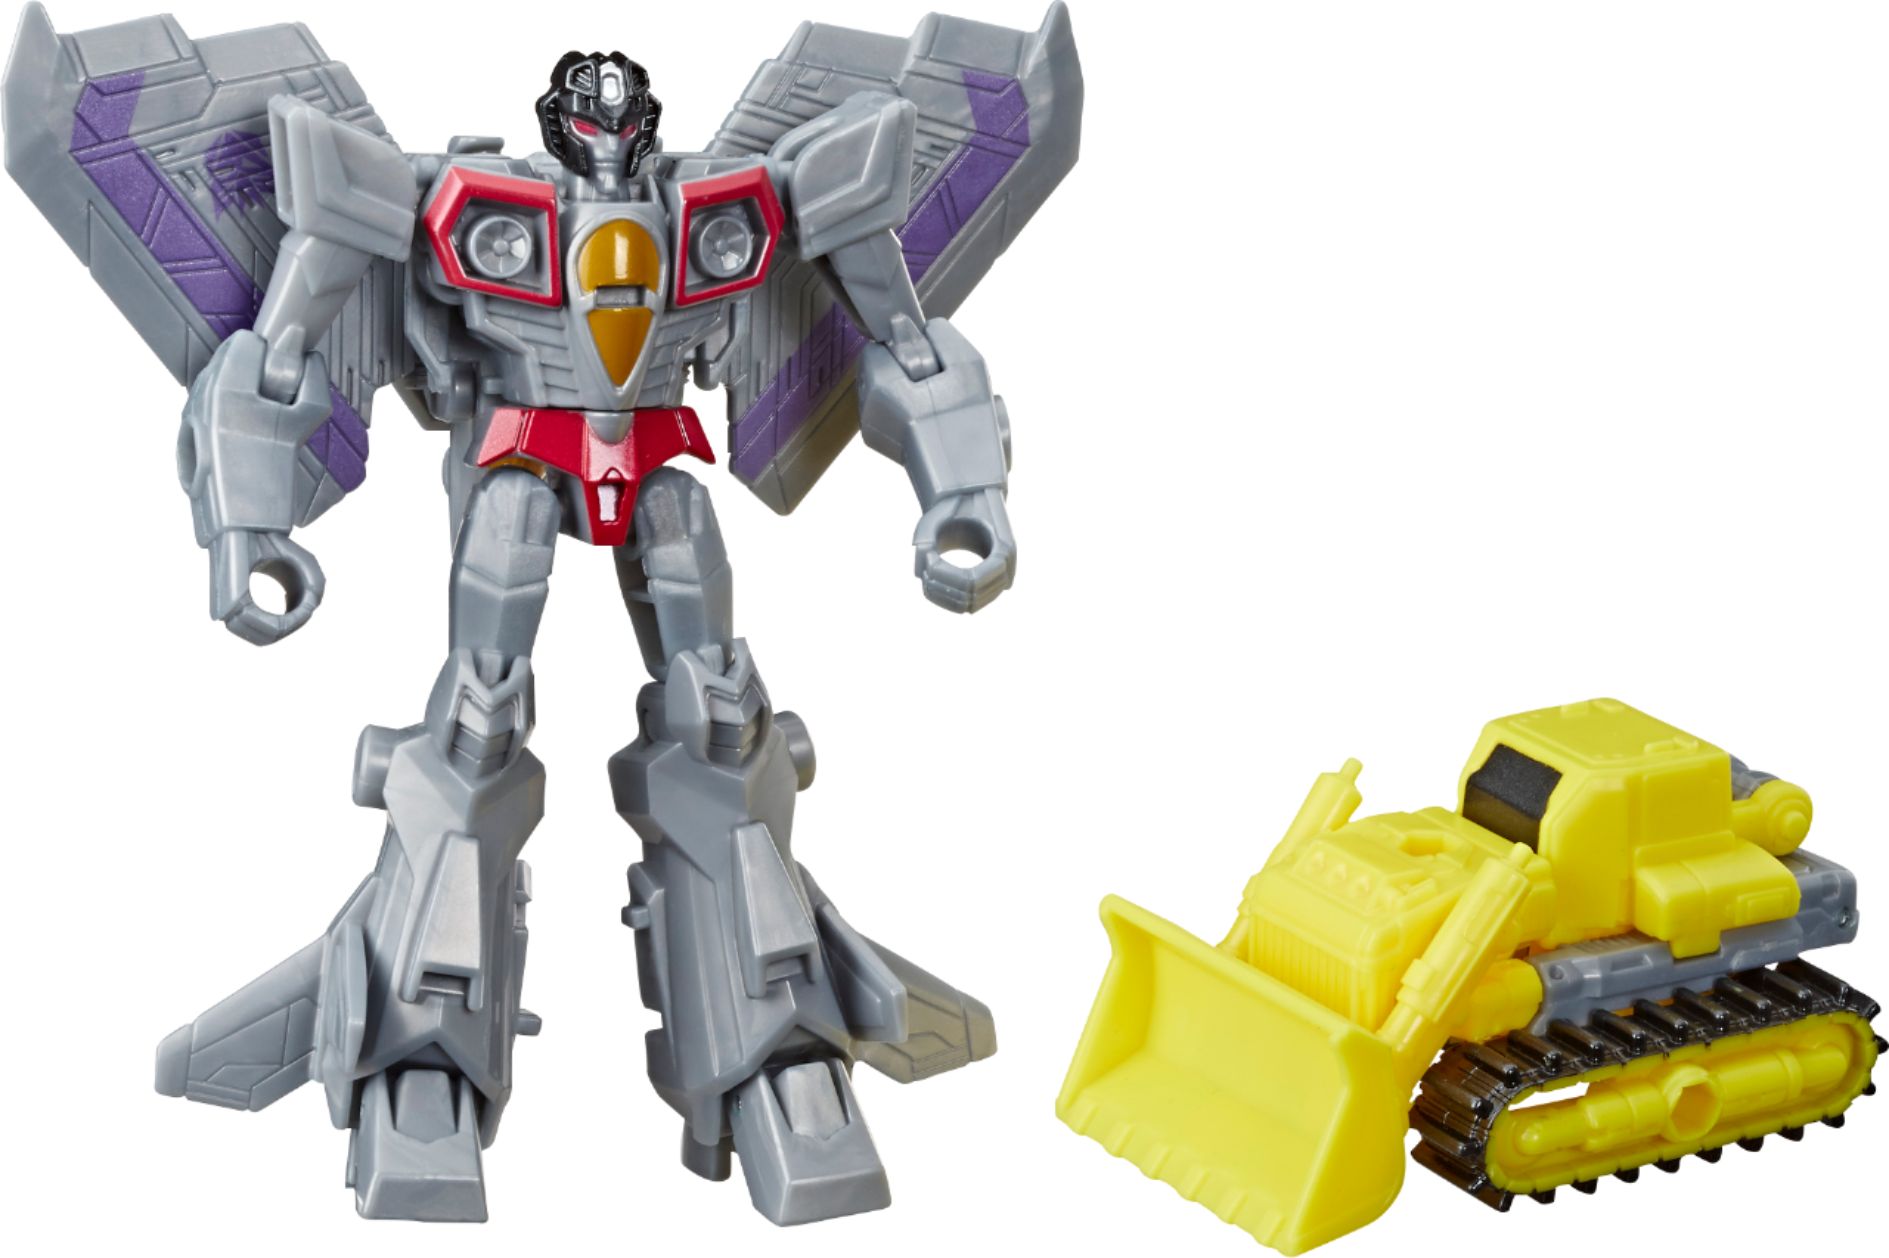 Transformers Toys Cyberverse Spark Armor Bumblebee Action Figure 